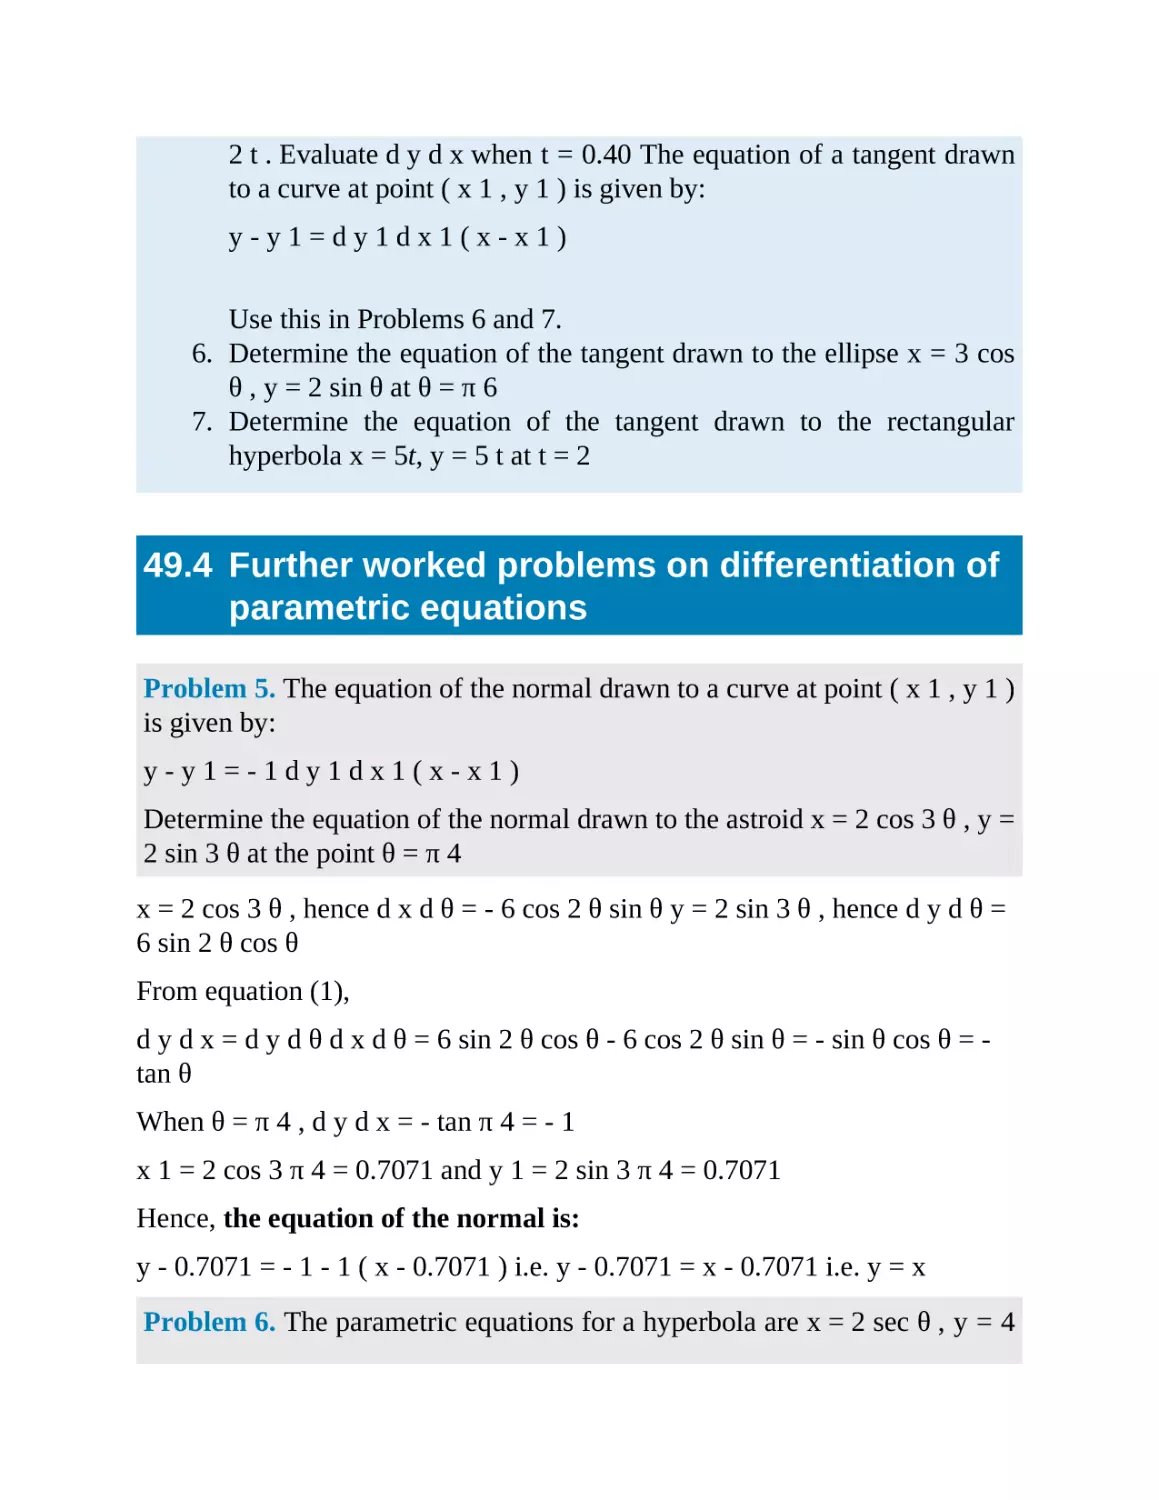 49.4 Further worked problems on differentiation of parametric equations